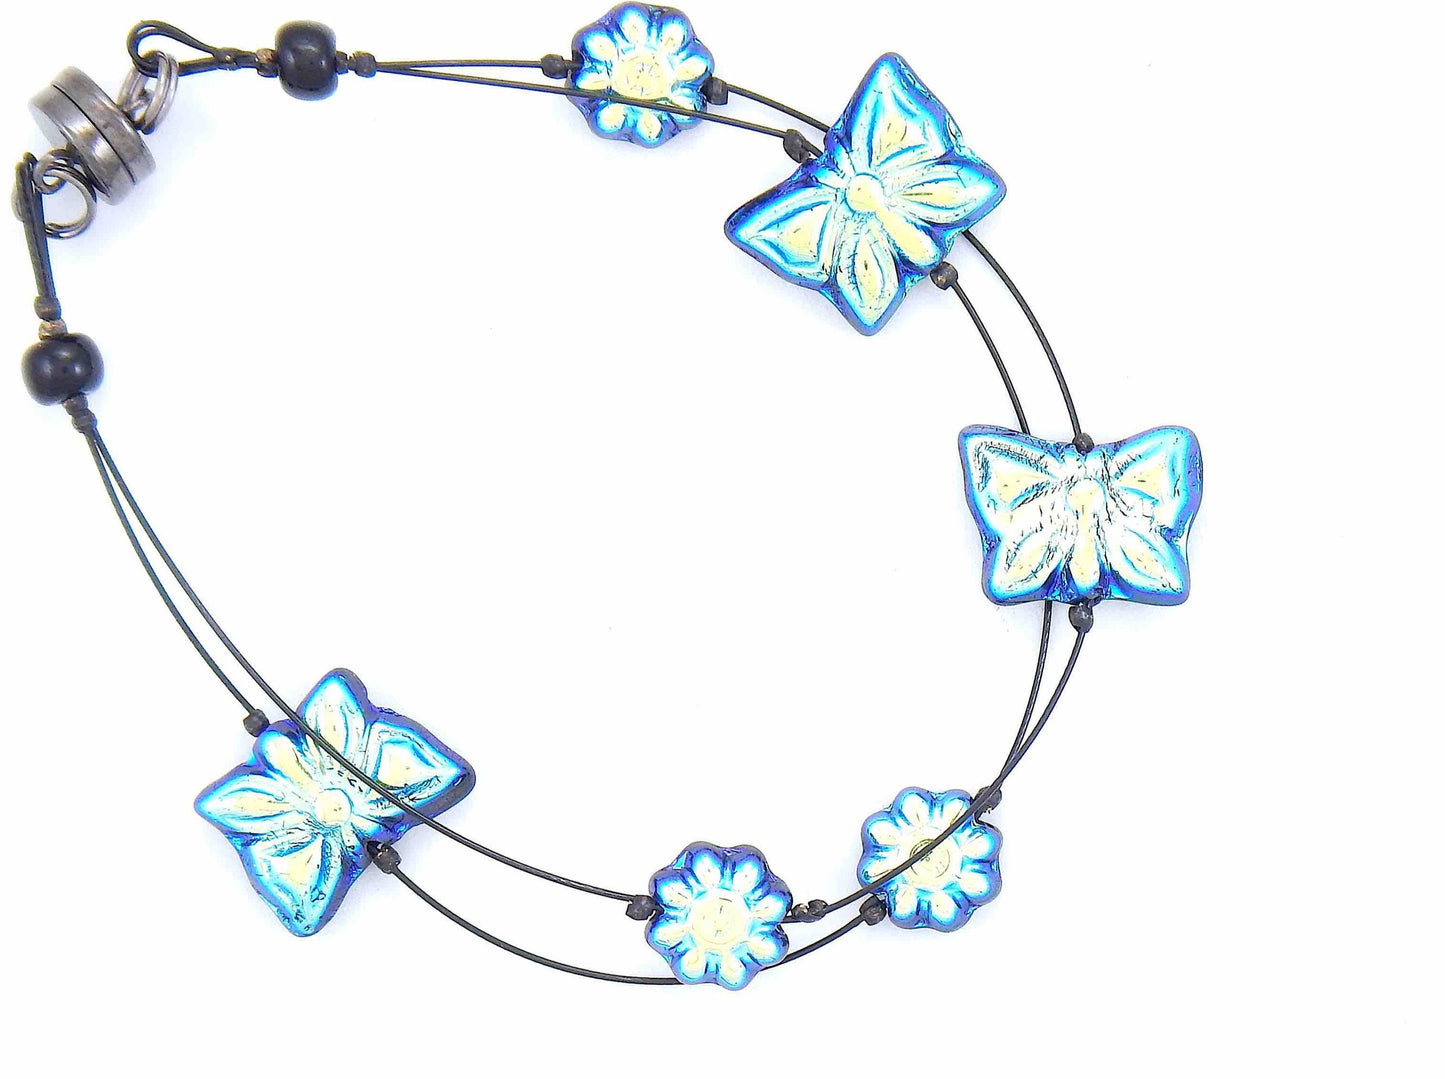 Double-row bracelet with black and iridescent blue Czech glass butterflies and flowers, magnetic black nickel clasp